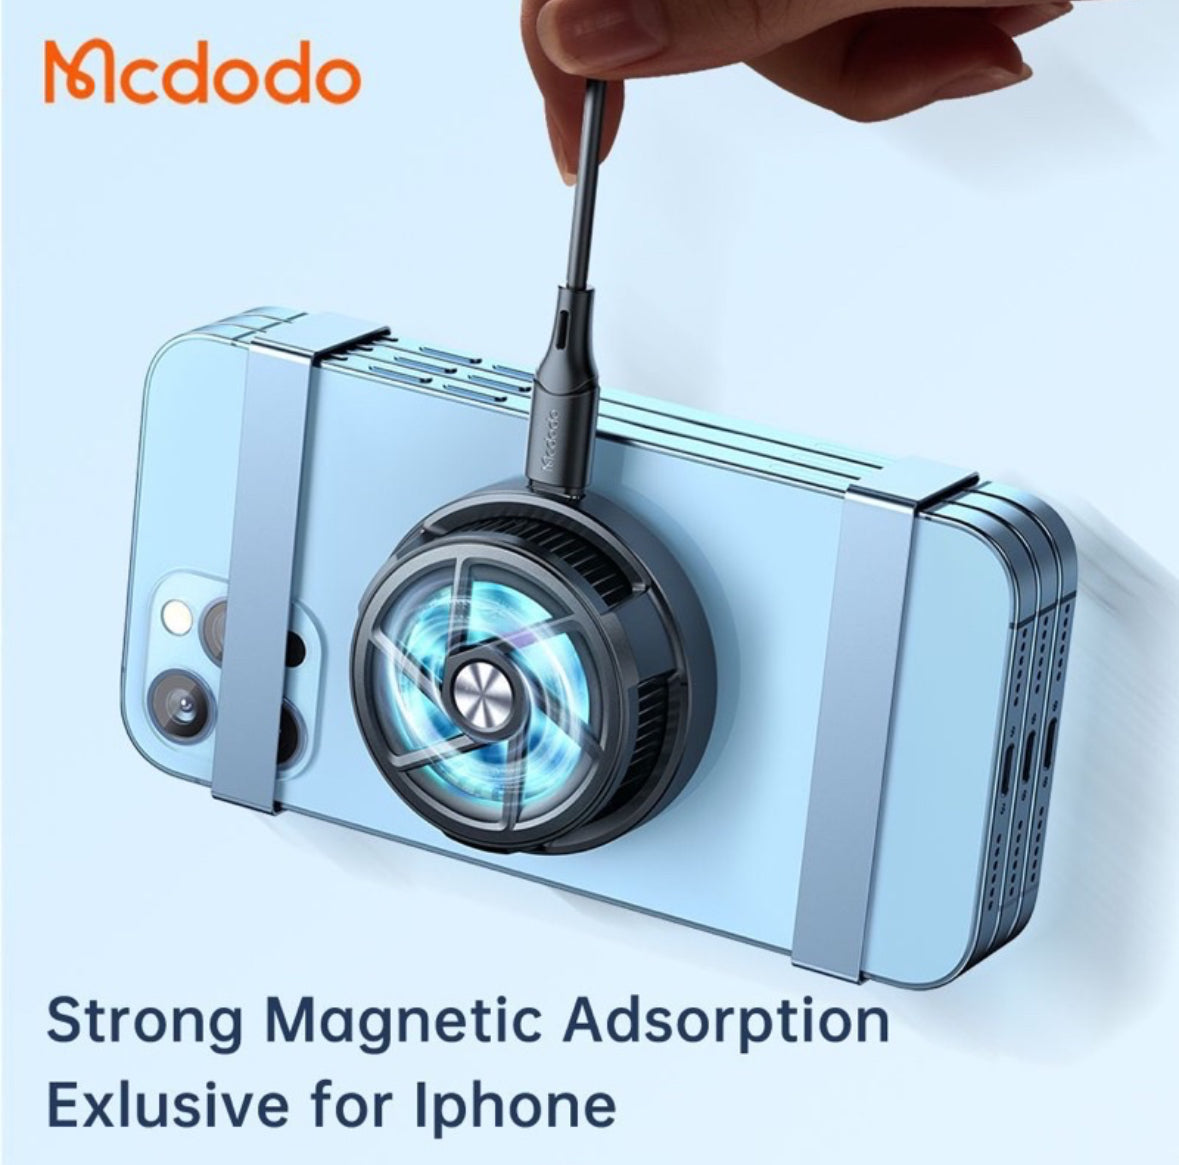 Mcdodo Magnetic Wireless Gaming Charger with Cooling Fan CH-2120